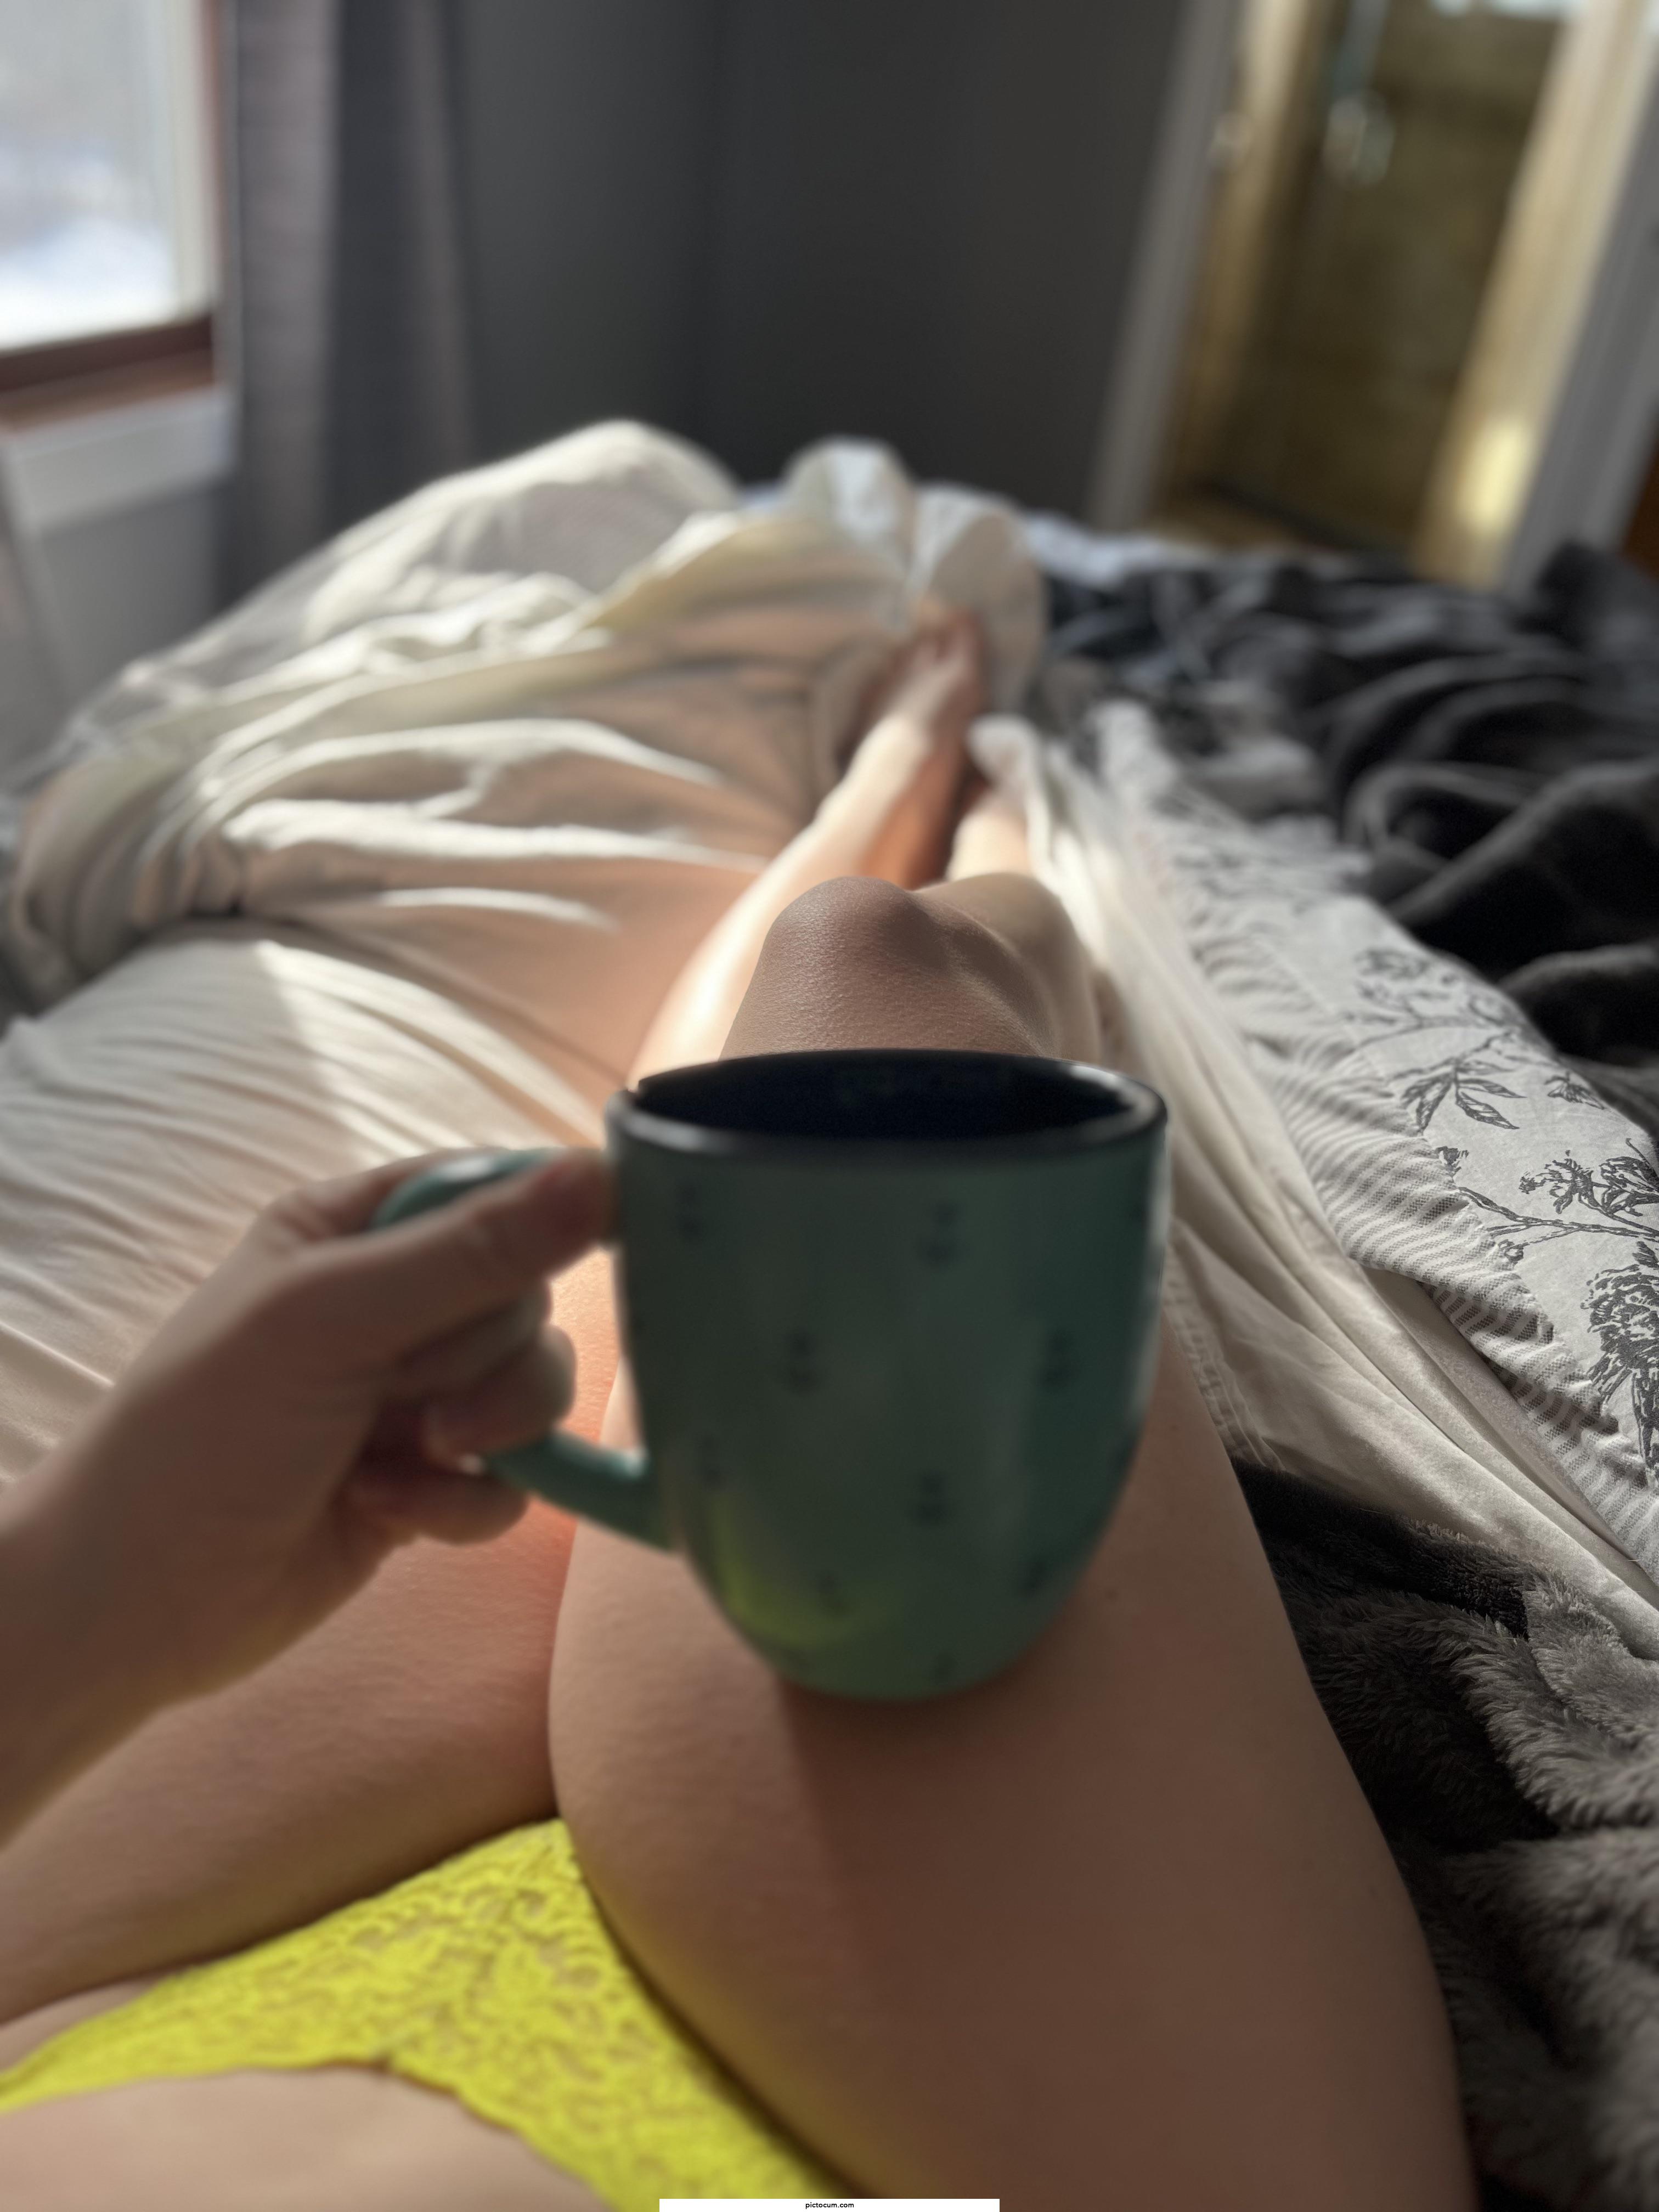 Anyone else enjoy coffee in bed?